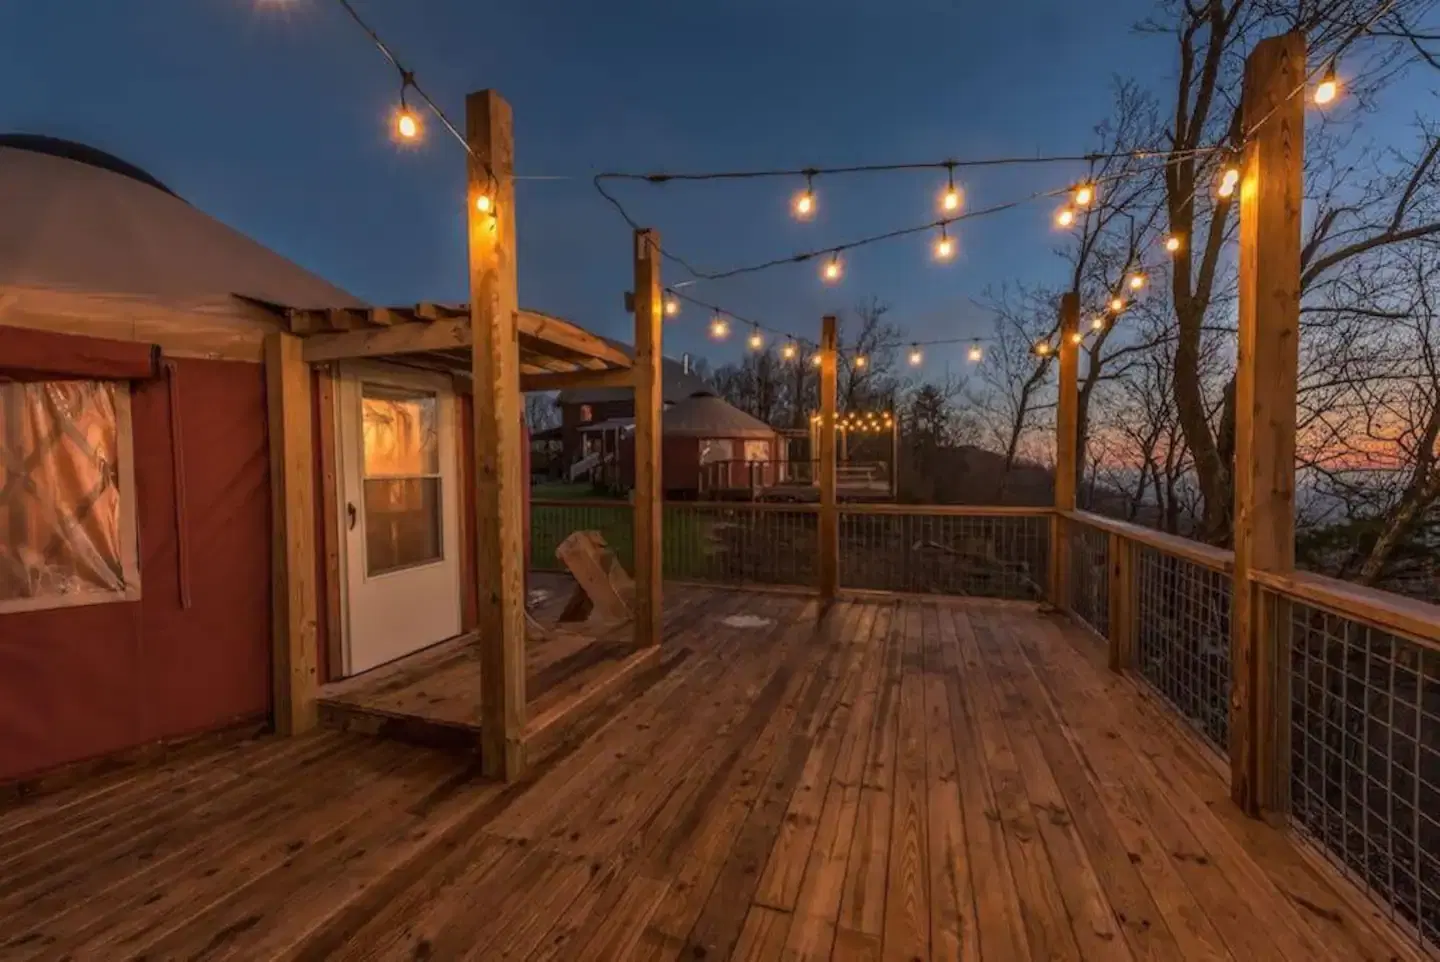 A wooden deck with string lights at dusk features a small structure with a white door and trees in the background.